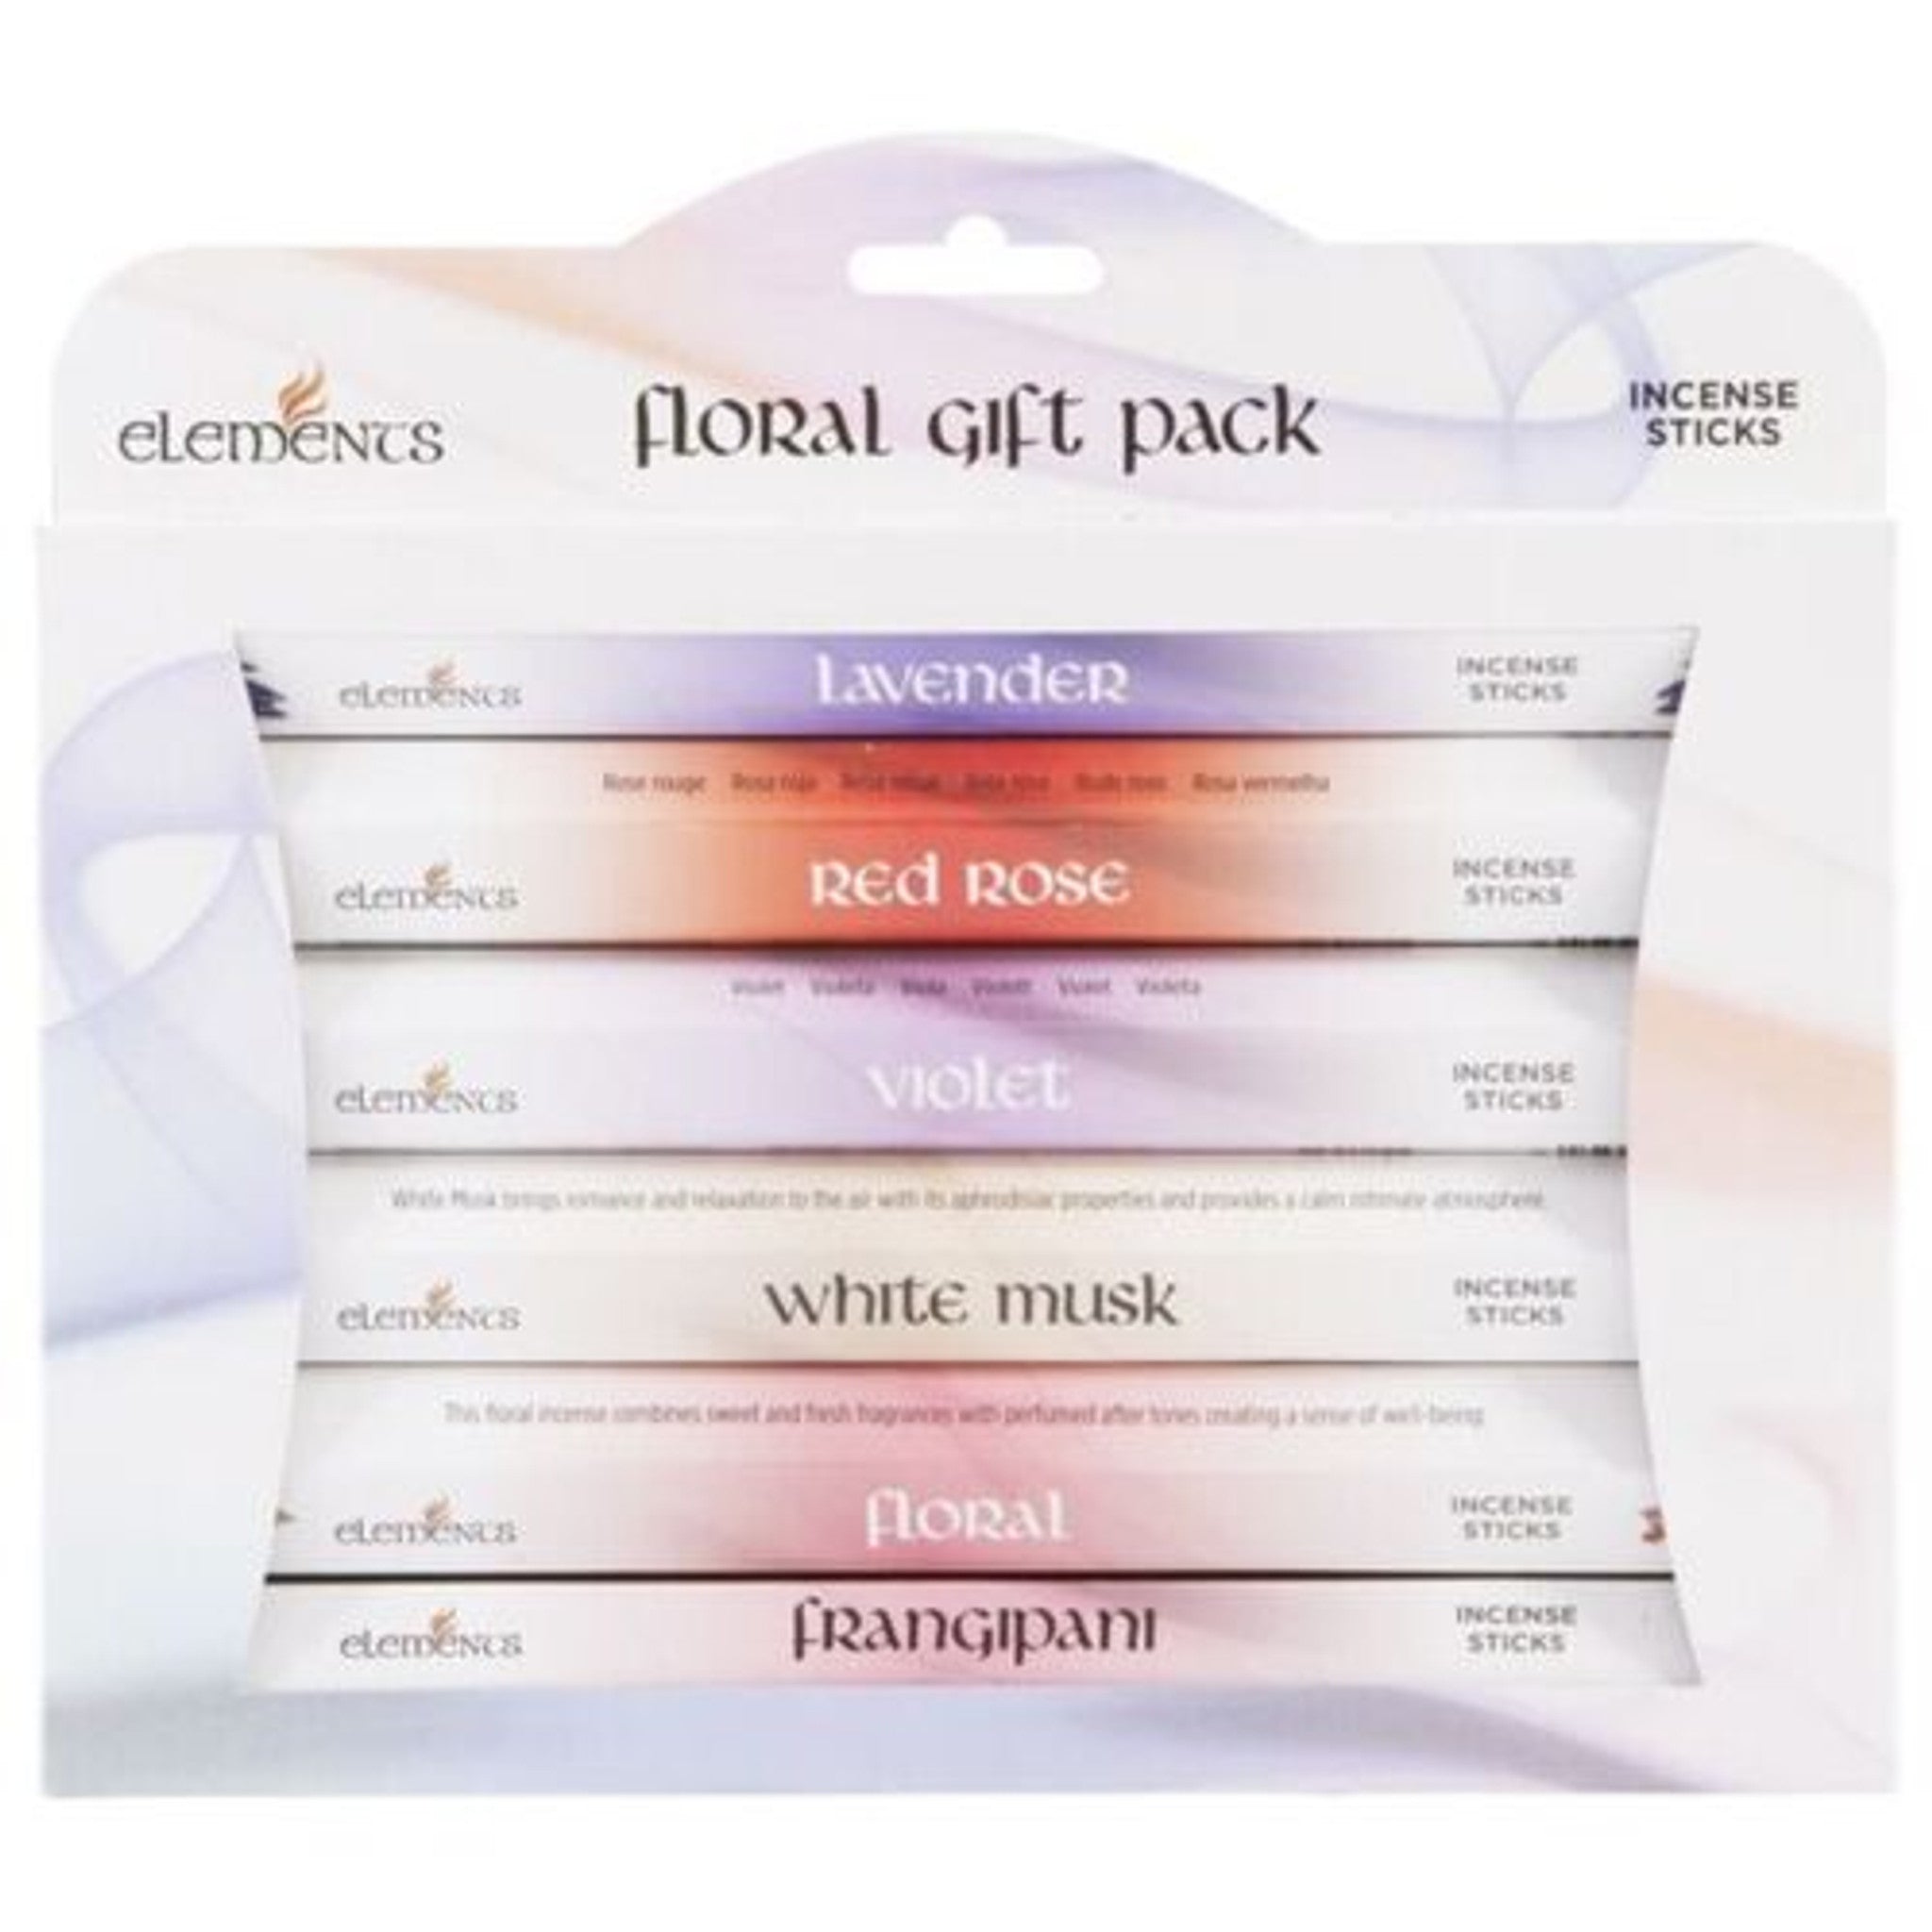 Elements Floral Gift Pack